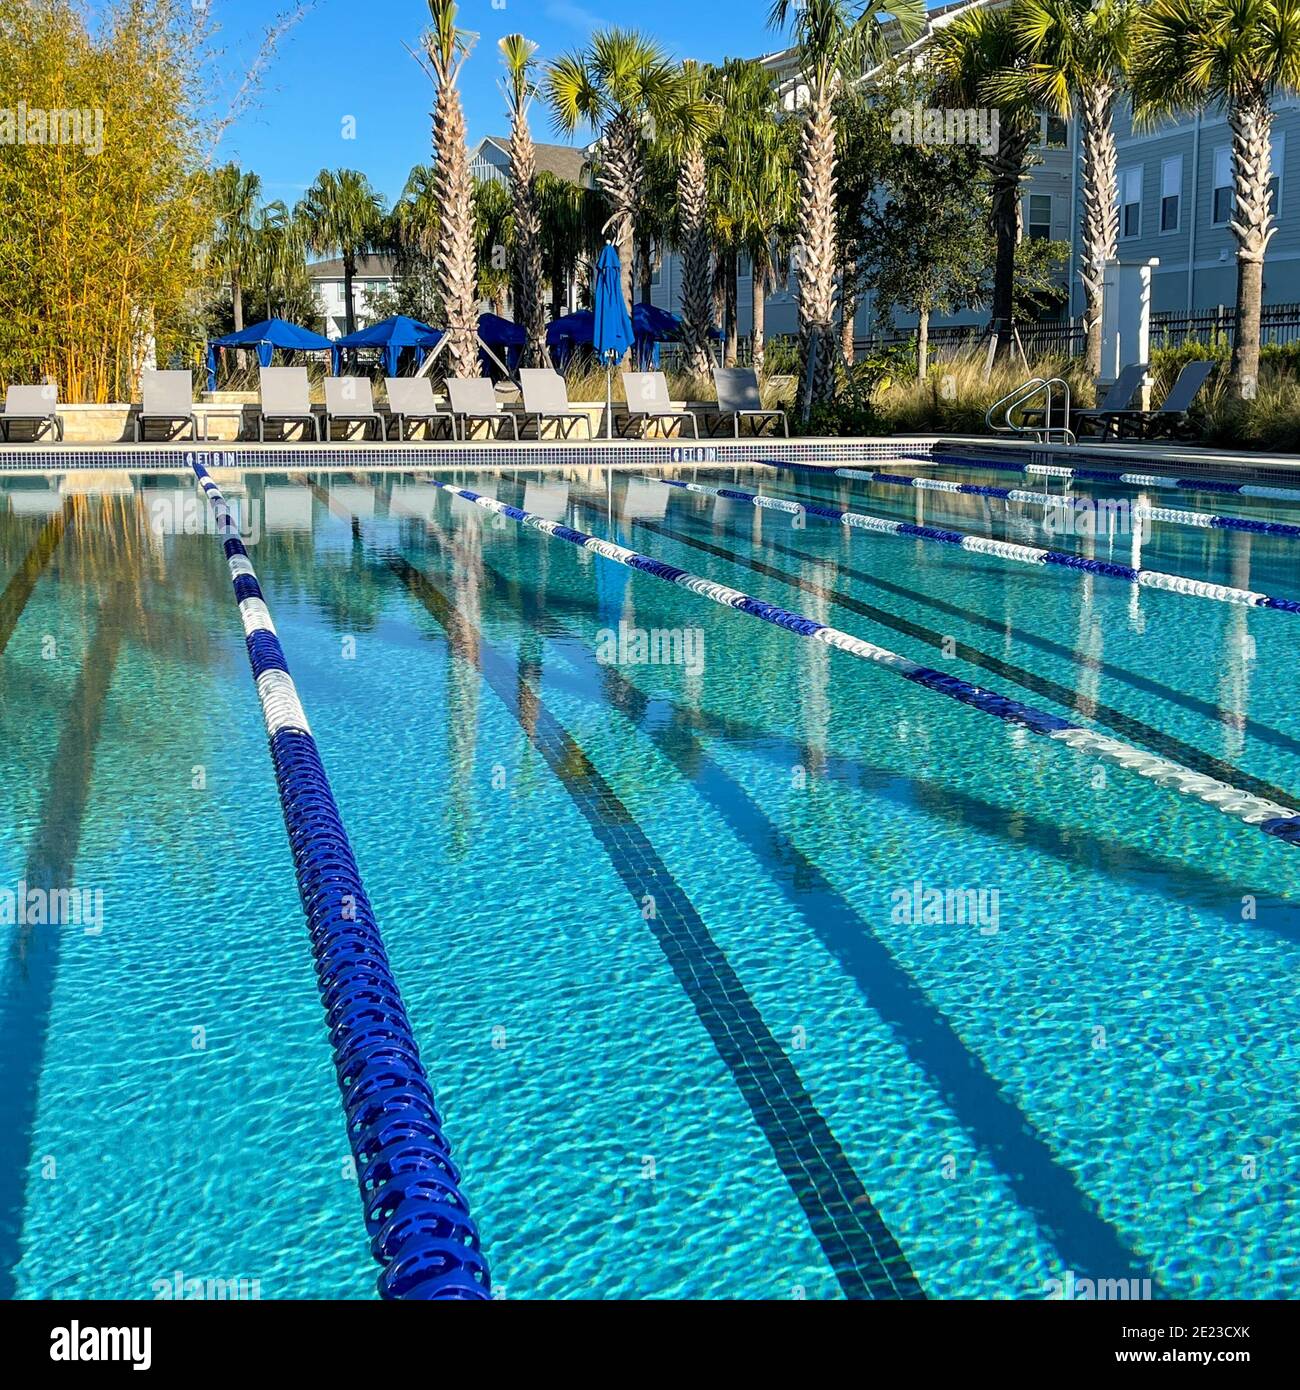 Page 2 Lap Pool High Resolution Stock Photography And Images Alamy